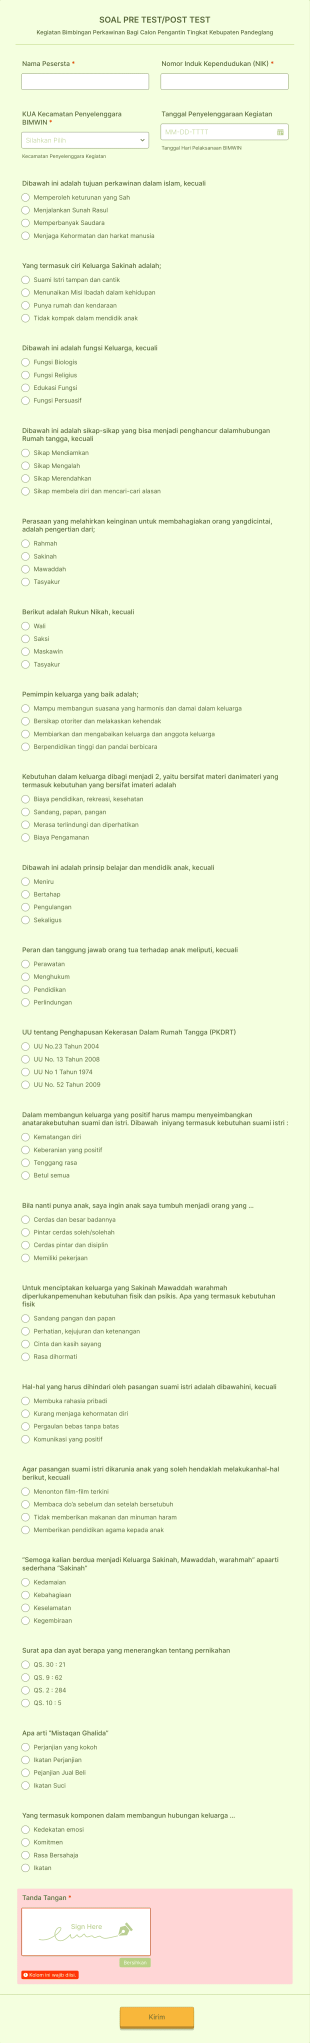 SOAL PRE TEST/POST TEST Form Template